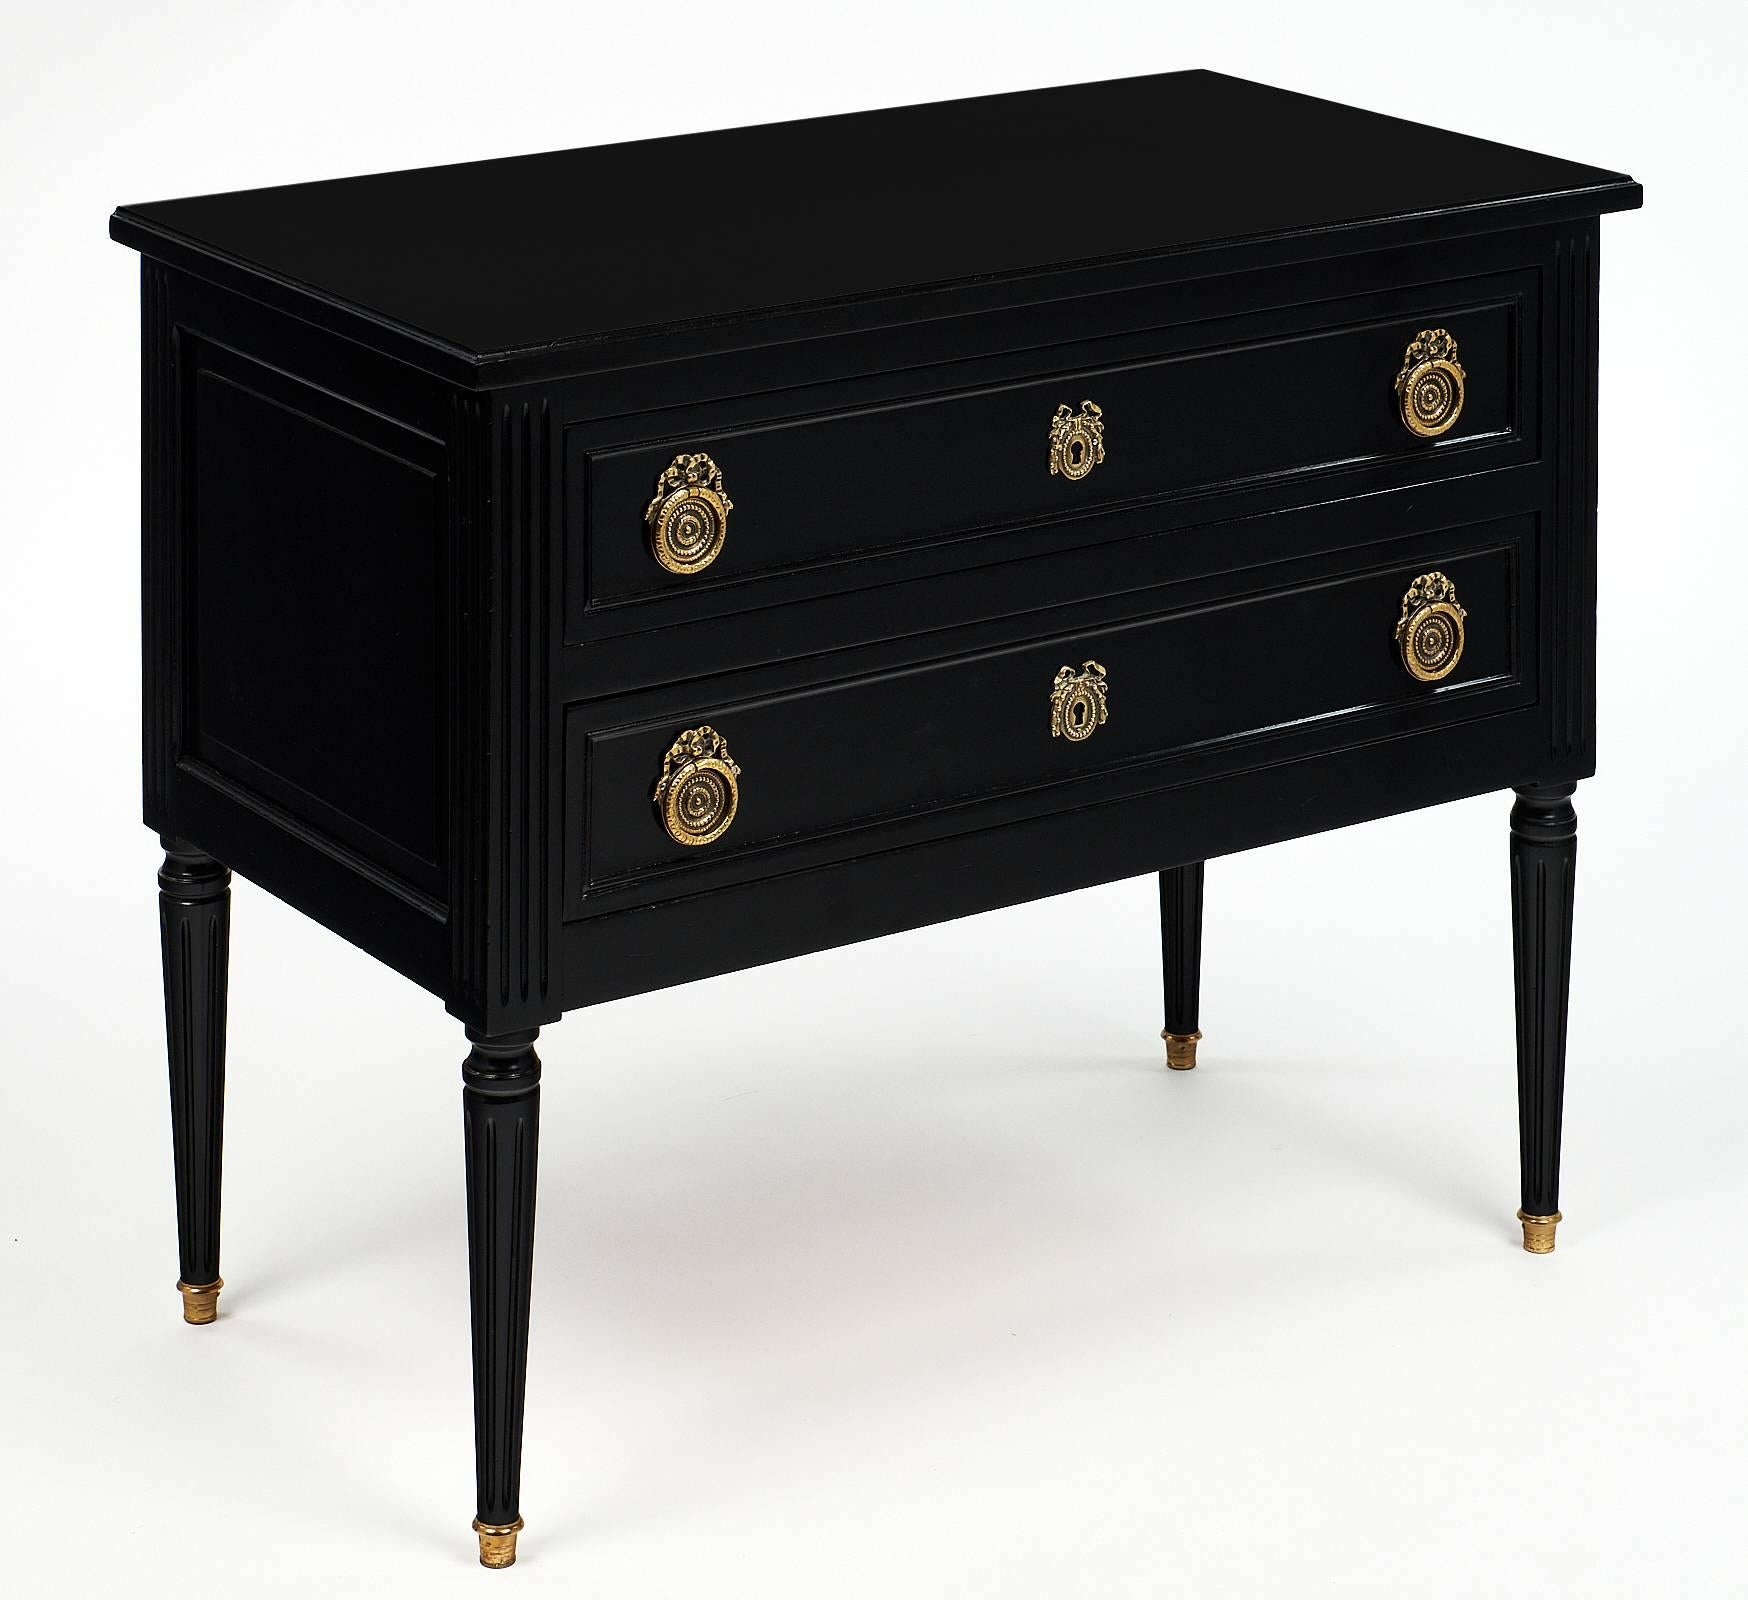 Made of solid ebonized walnut, this charming commode sauteuse is finished with a wonderful French polish. This piece has two dovetailed drawers and finely cast bronze hardware.